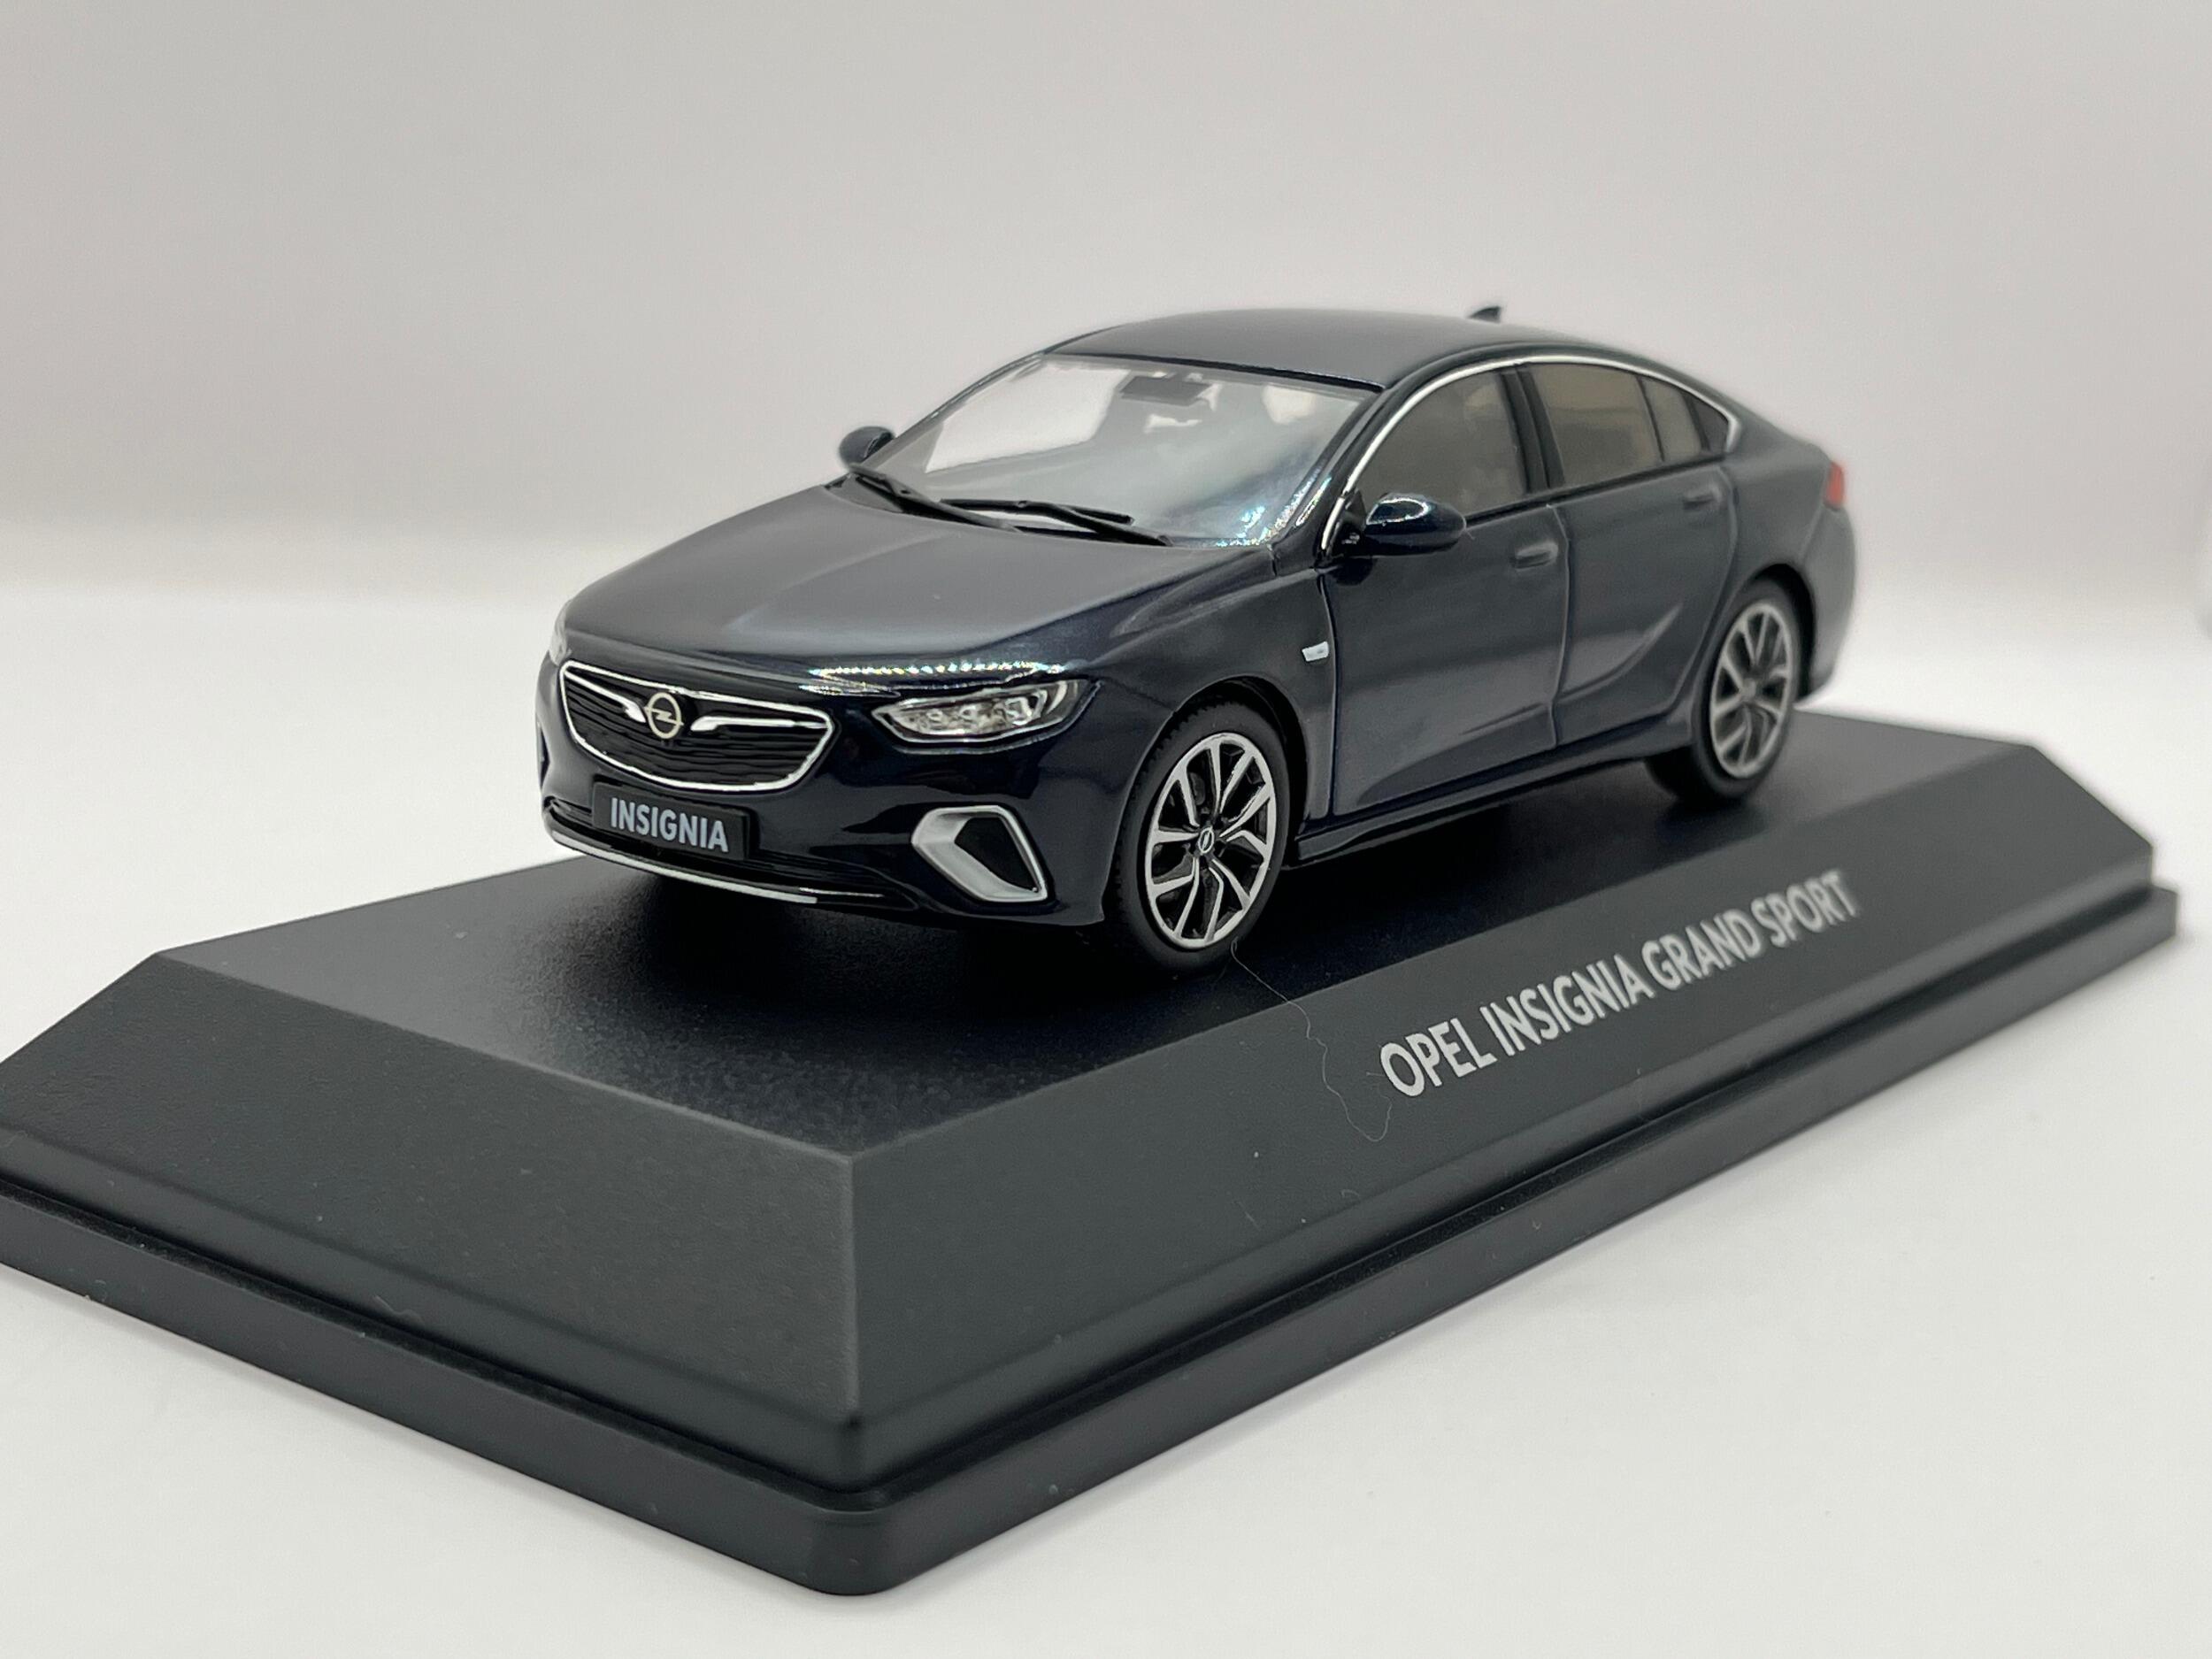 An excellent scale model of an Opel (Vauxhall) Insignia Grand Sport decorated in dark blue with silver and black wheels.  Other trims are finished in chrome, silver and black.